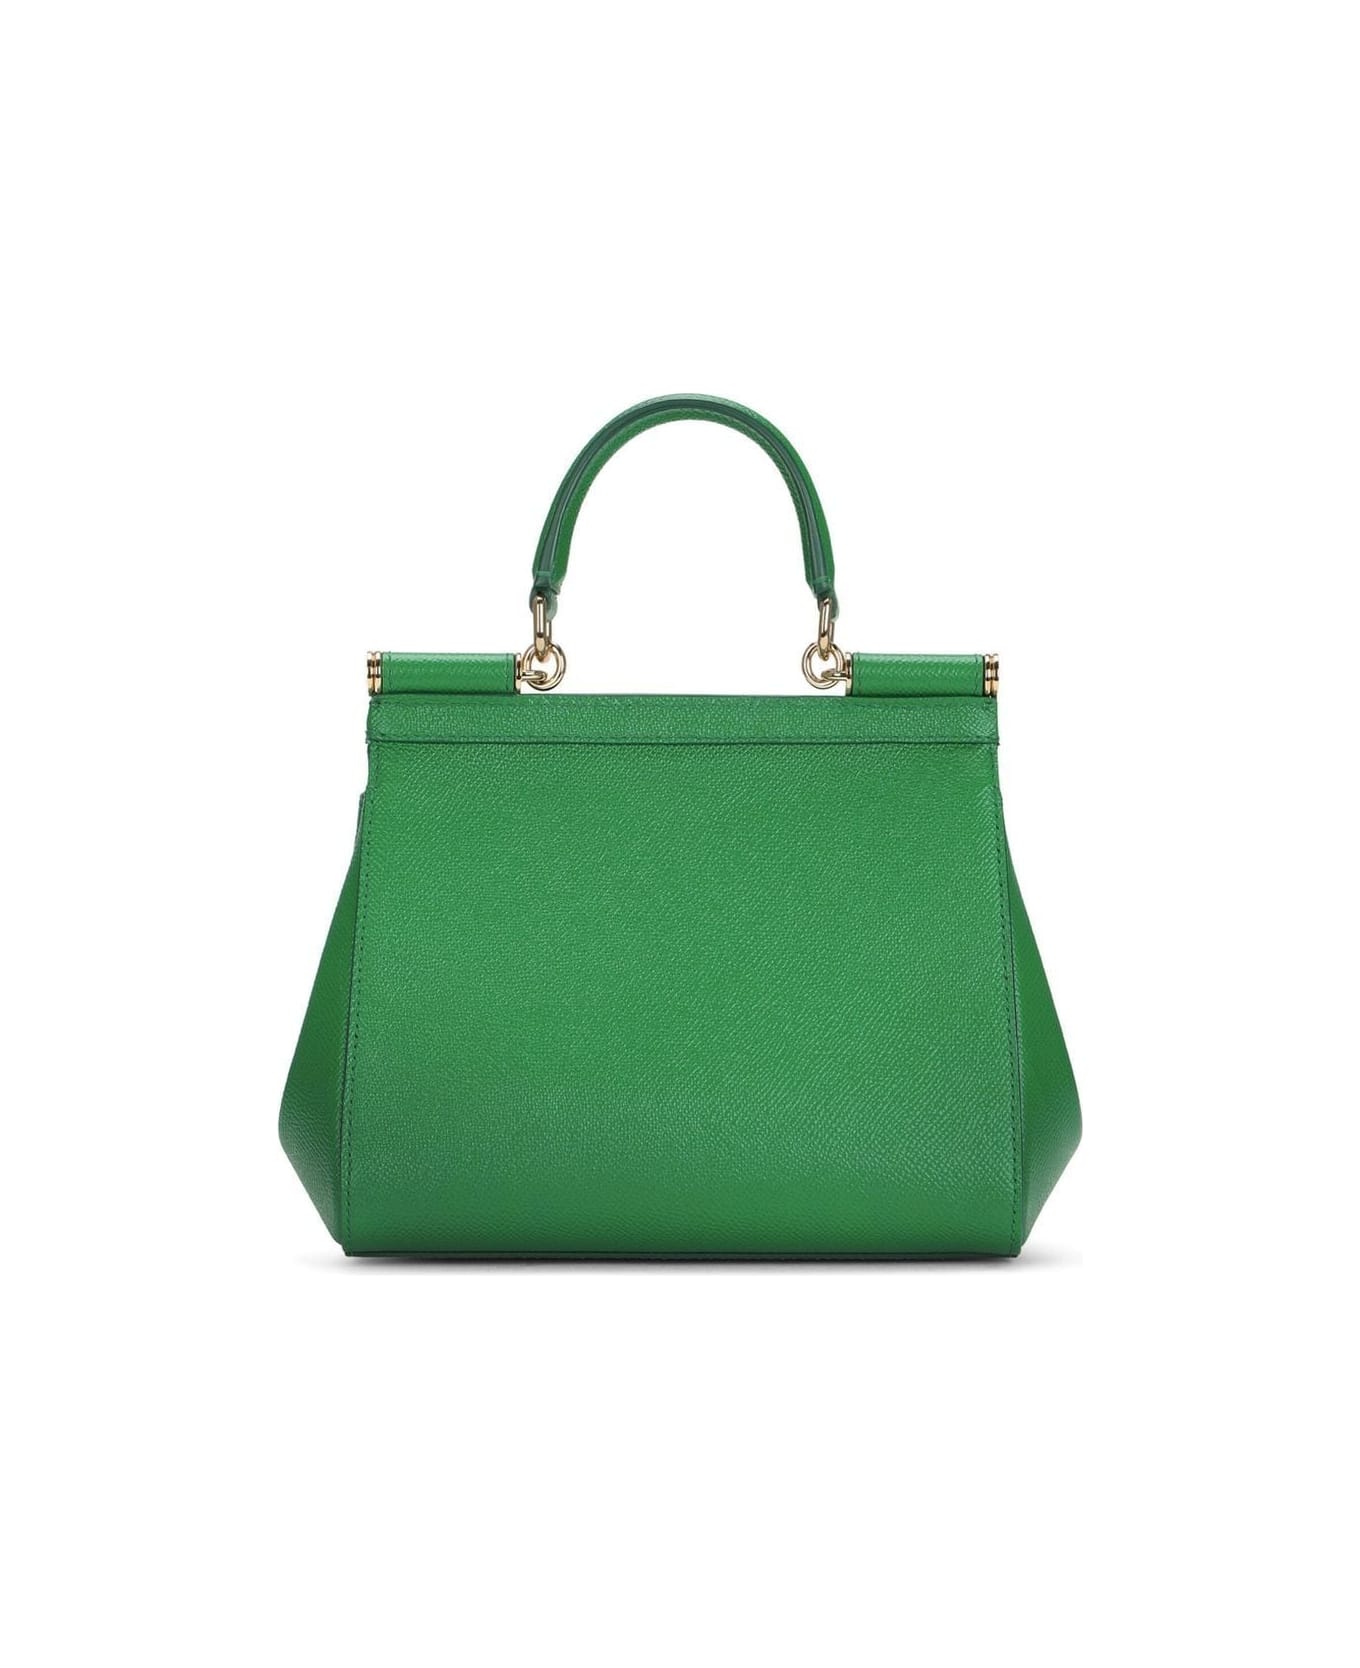 Dolce & Gabbana 'small Sicily' Green Handbag With Branded Galvanic Plaque In Dauphine Leather Woman - Green